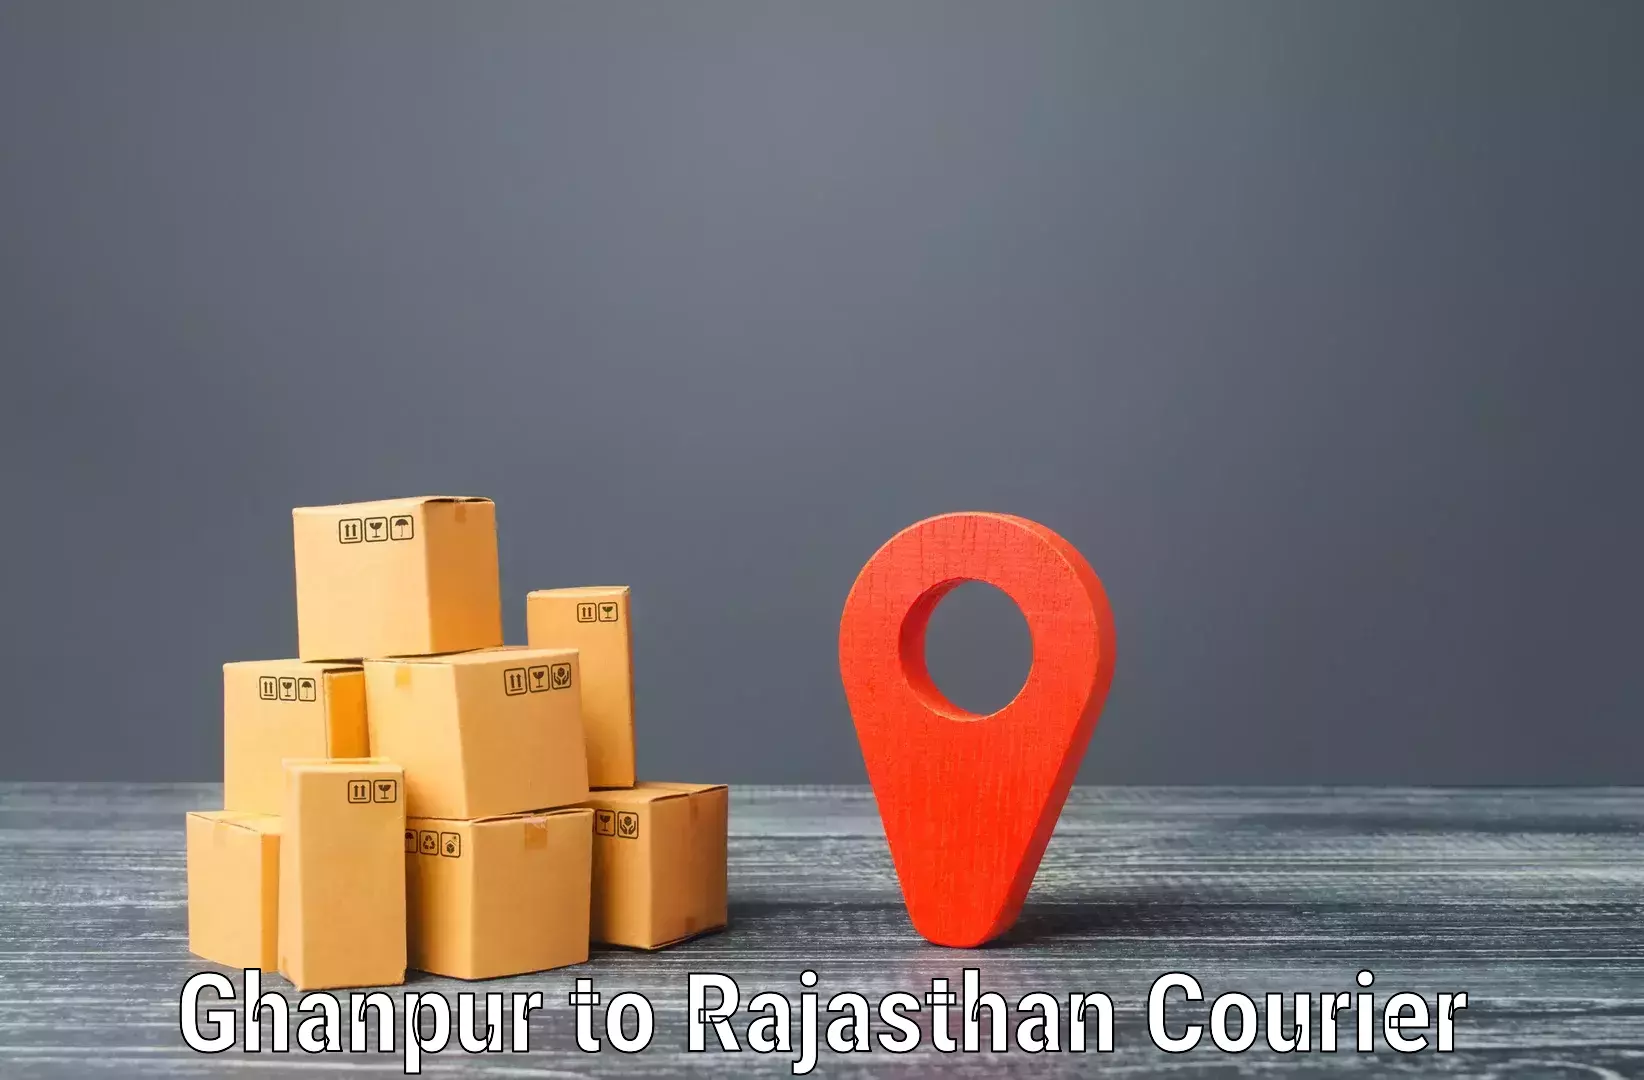 Custom courier packages Ghanpur to Piparcity